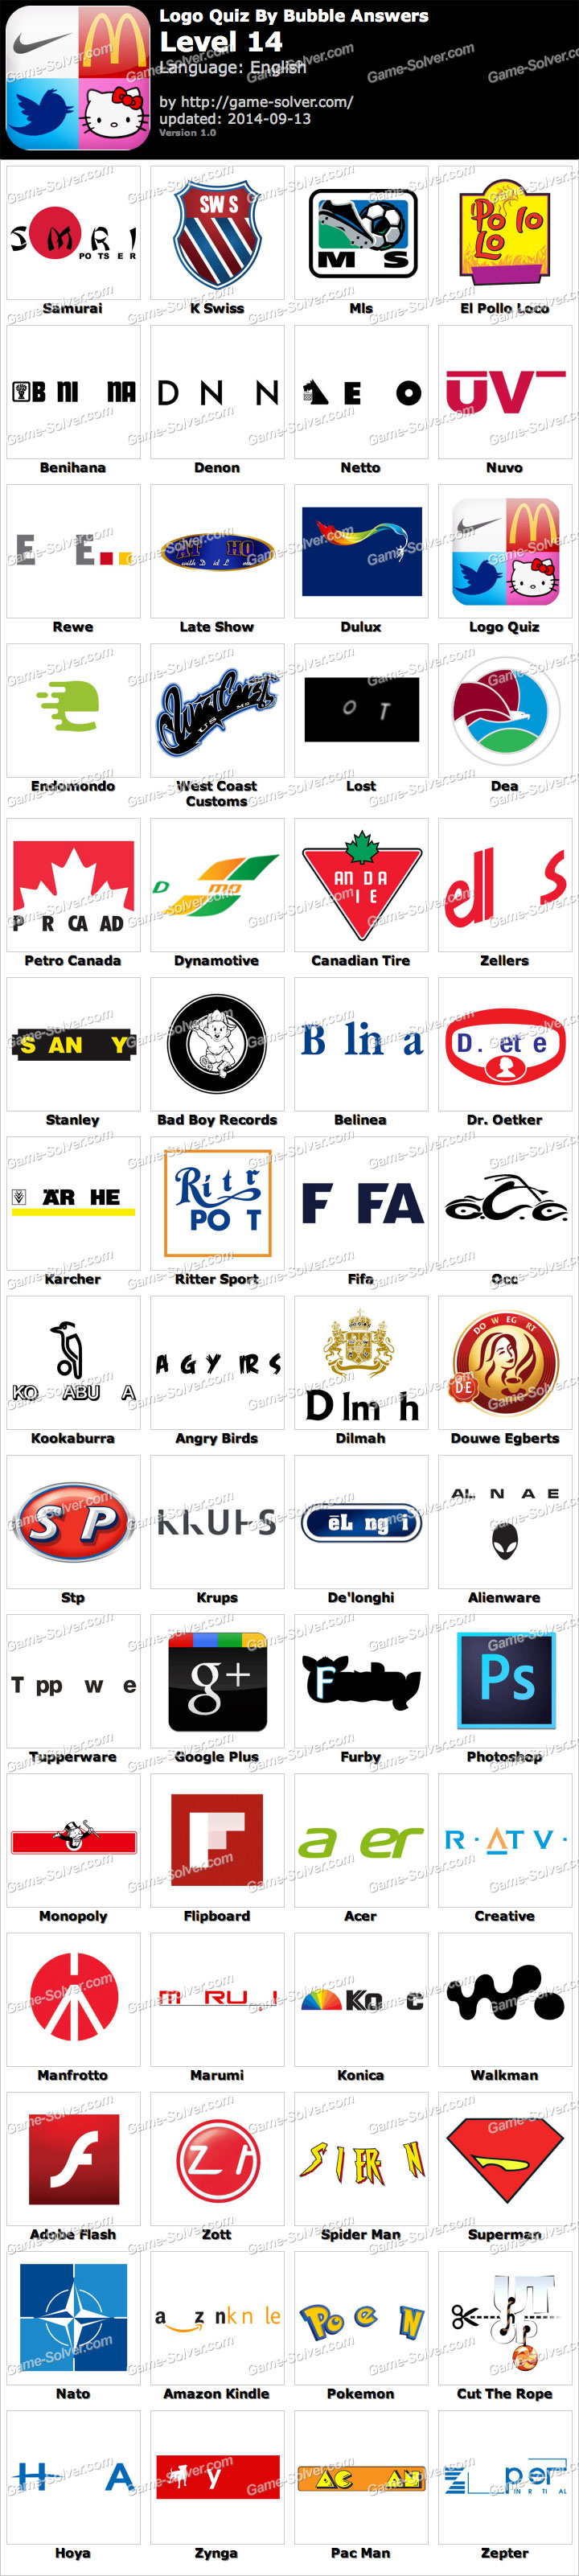 Logos Quiz Game Level 14 Answers - Apps Answers .net